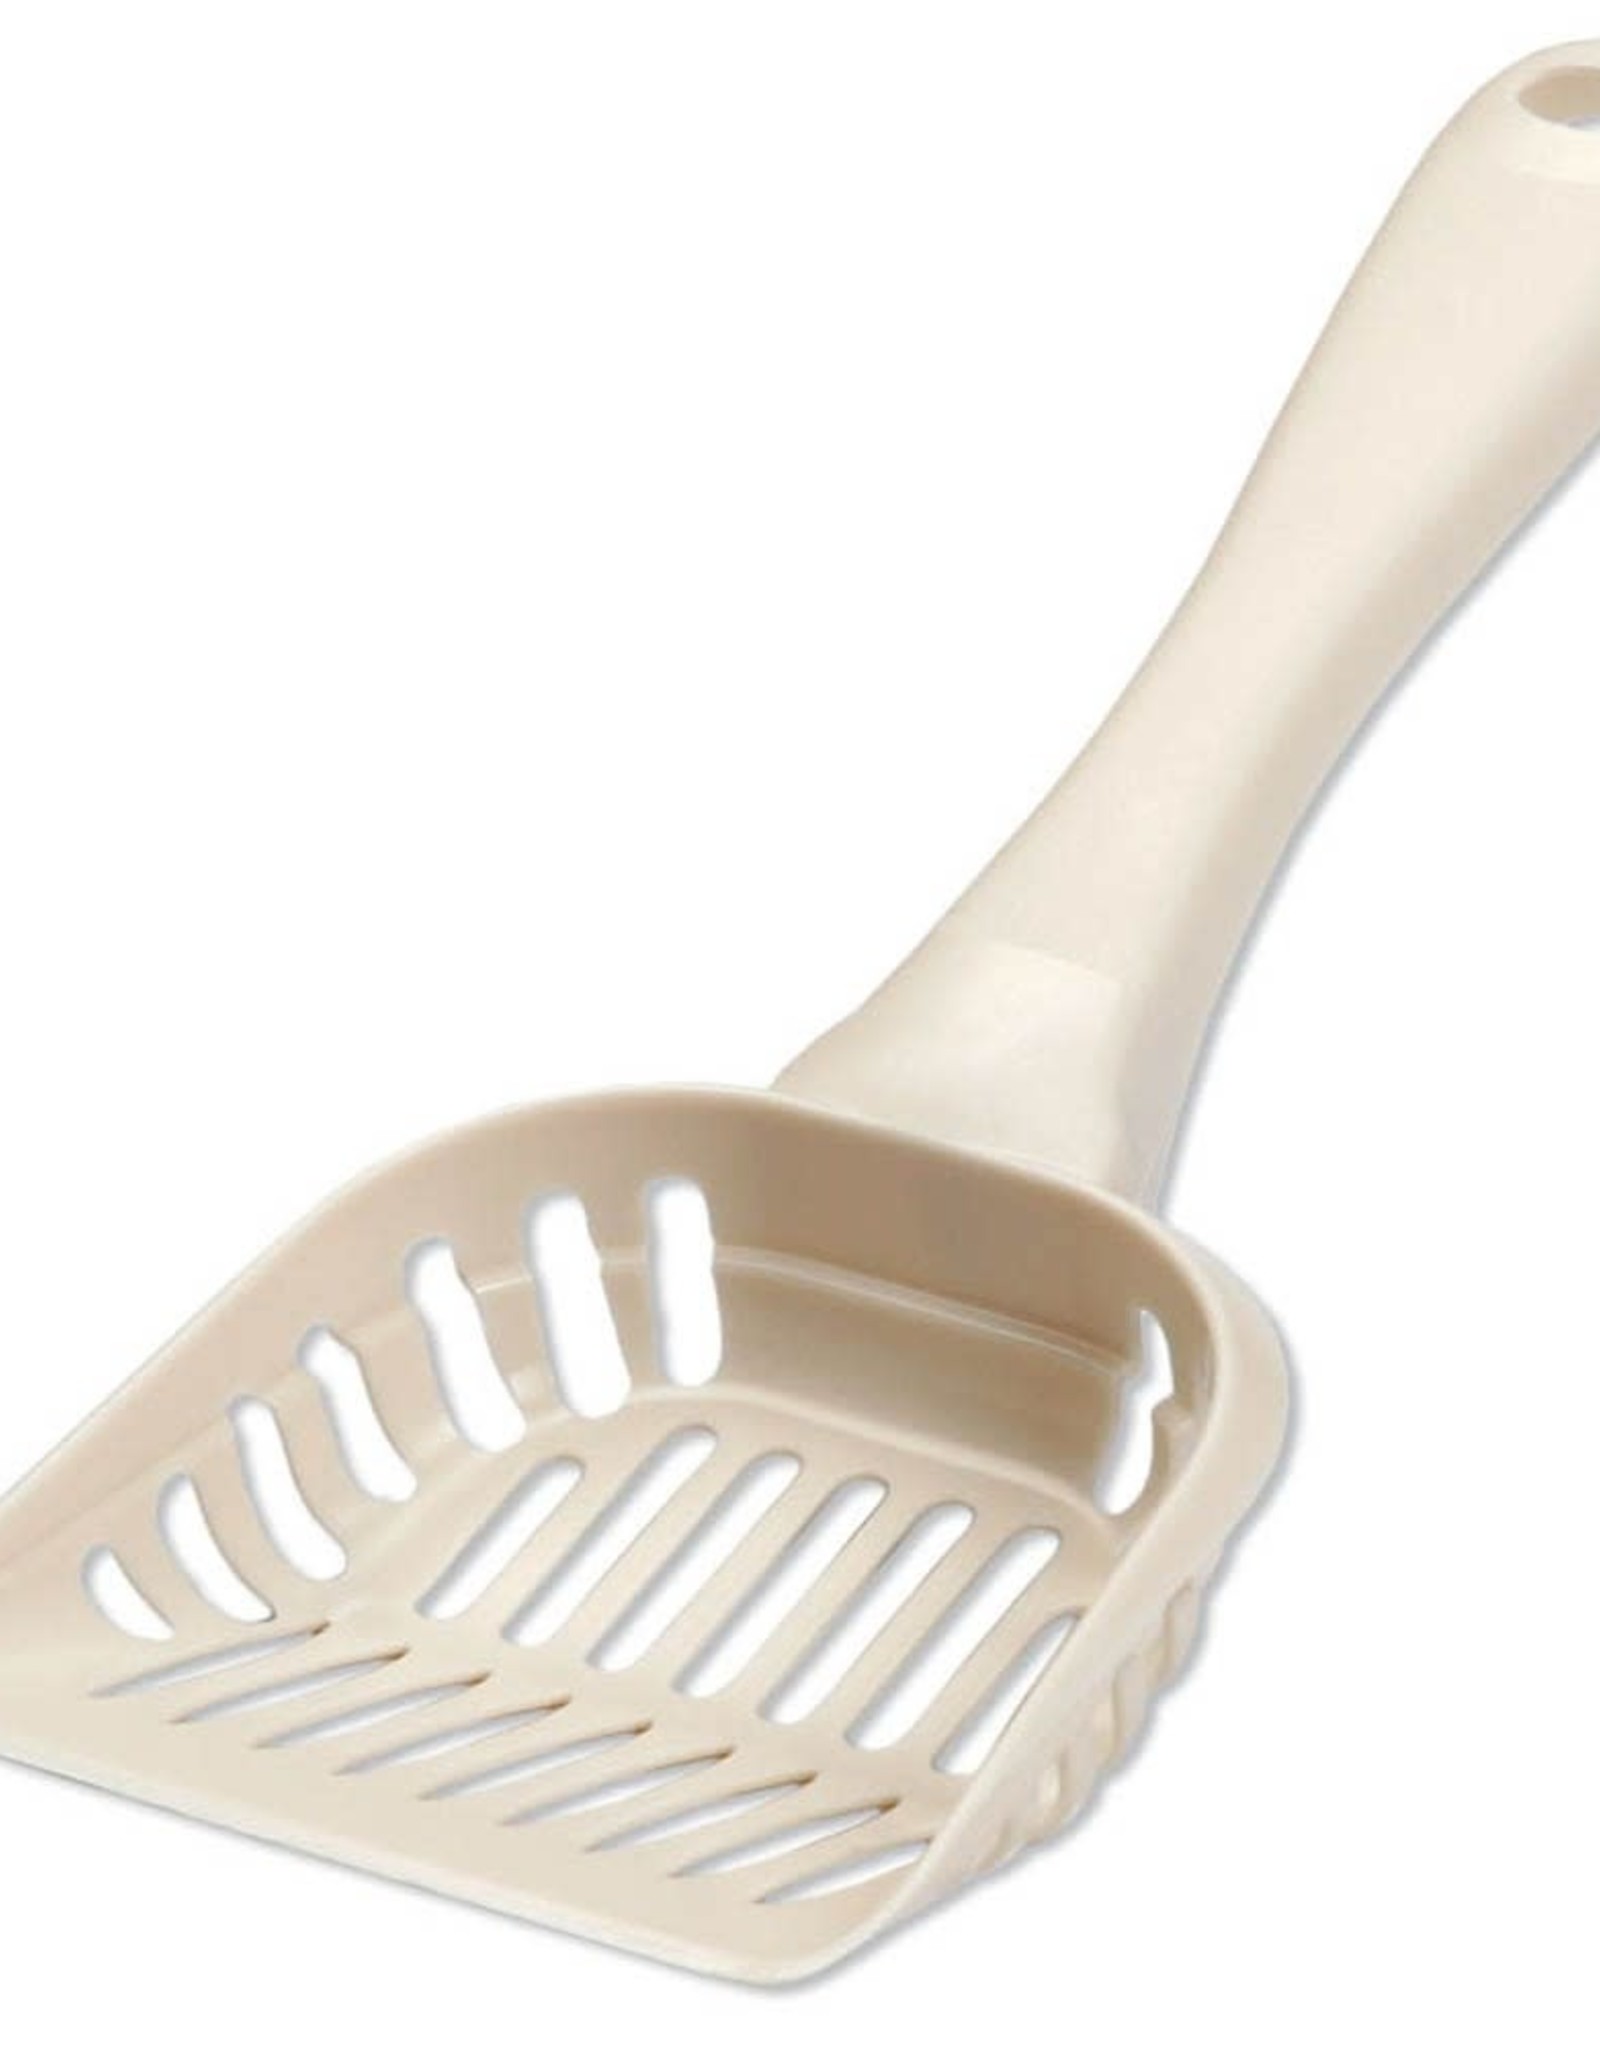 PETMATE INC Petmate Litter Scoop With Microban Bleached Linen Large